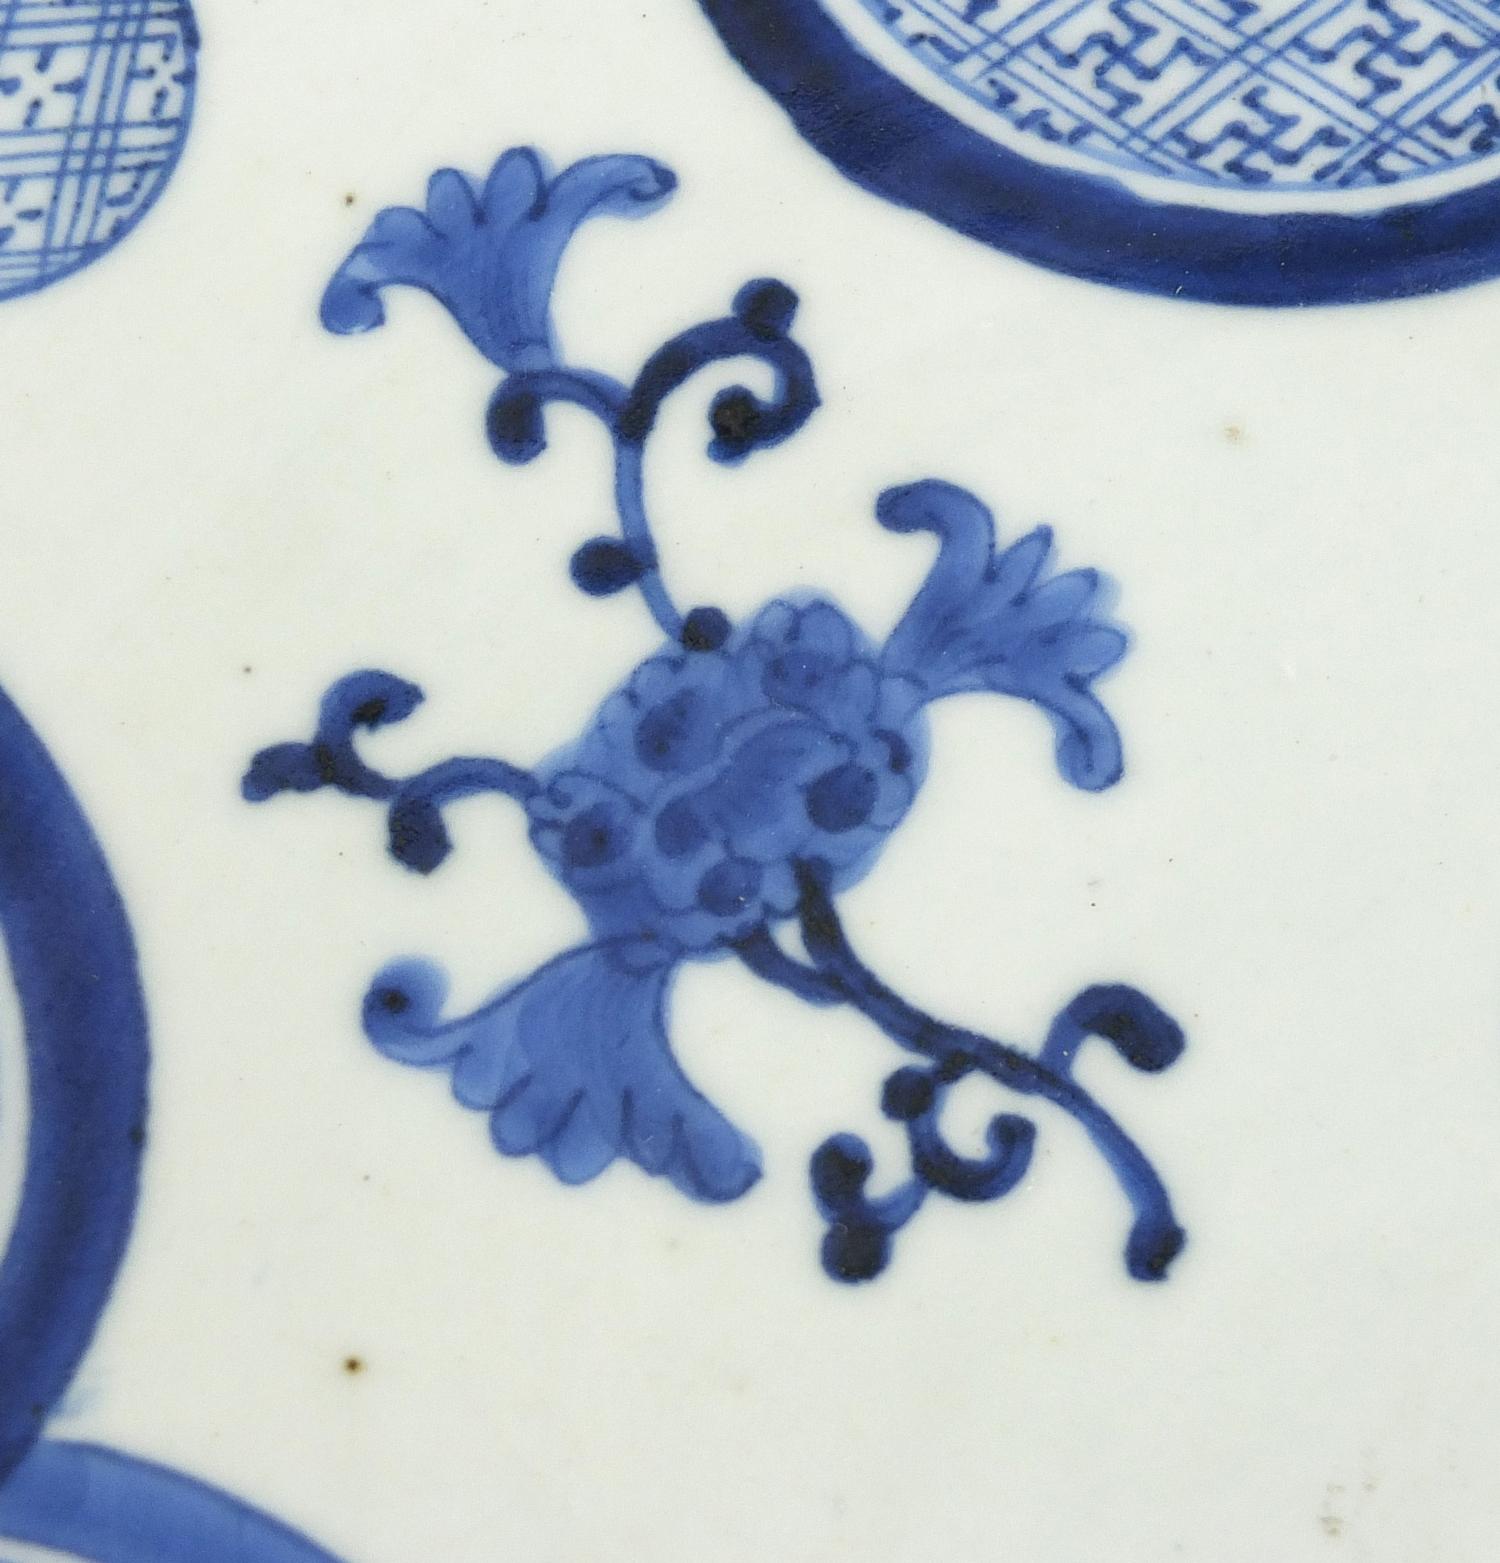 Japanese Arita porcelain charger hand painted with geometric roundels and floral sprays, character - Image 4 of 7